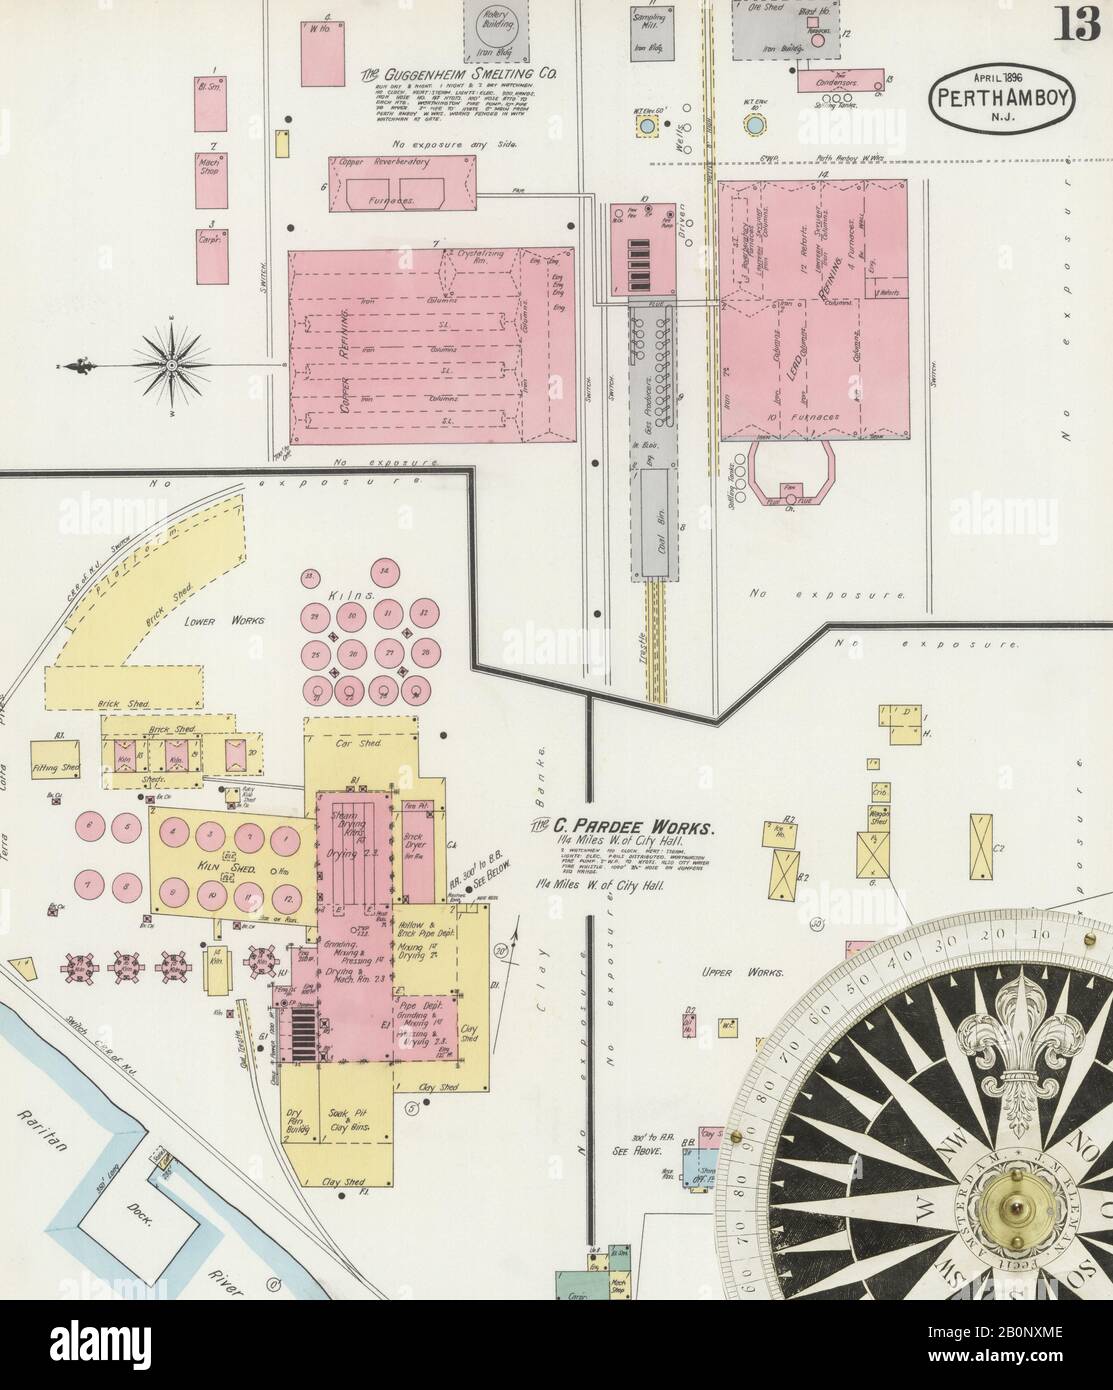 Image 13 of Sanborn Fire Insurance Map from Perth Amboy, Middlesex County, New Jersey. Apr 1896. 14 Sheet(s), America, street map with a Nineteenth Century compass Stock Photo